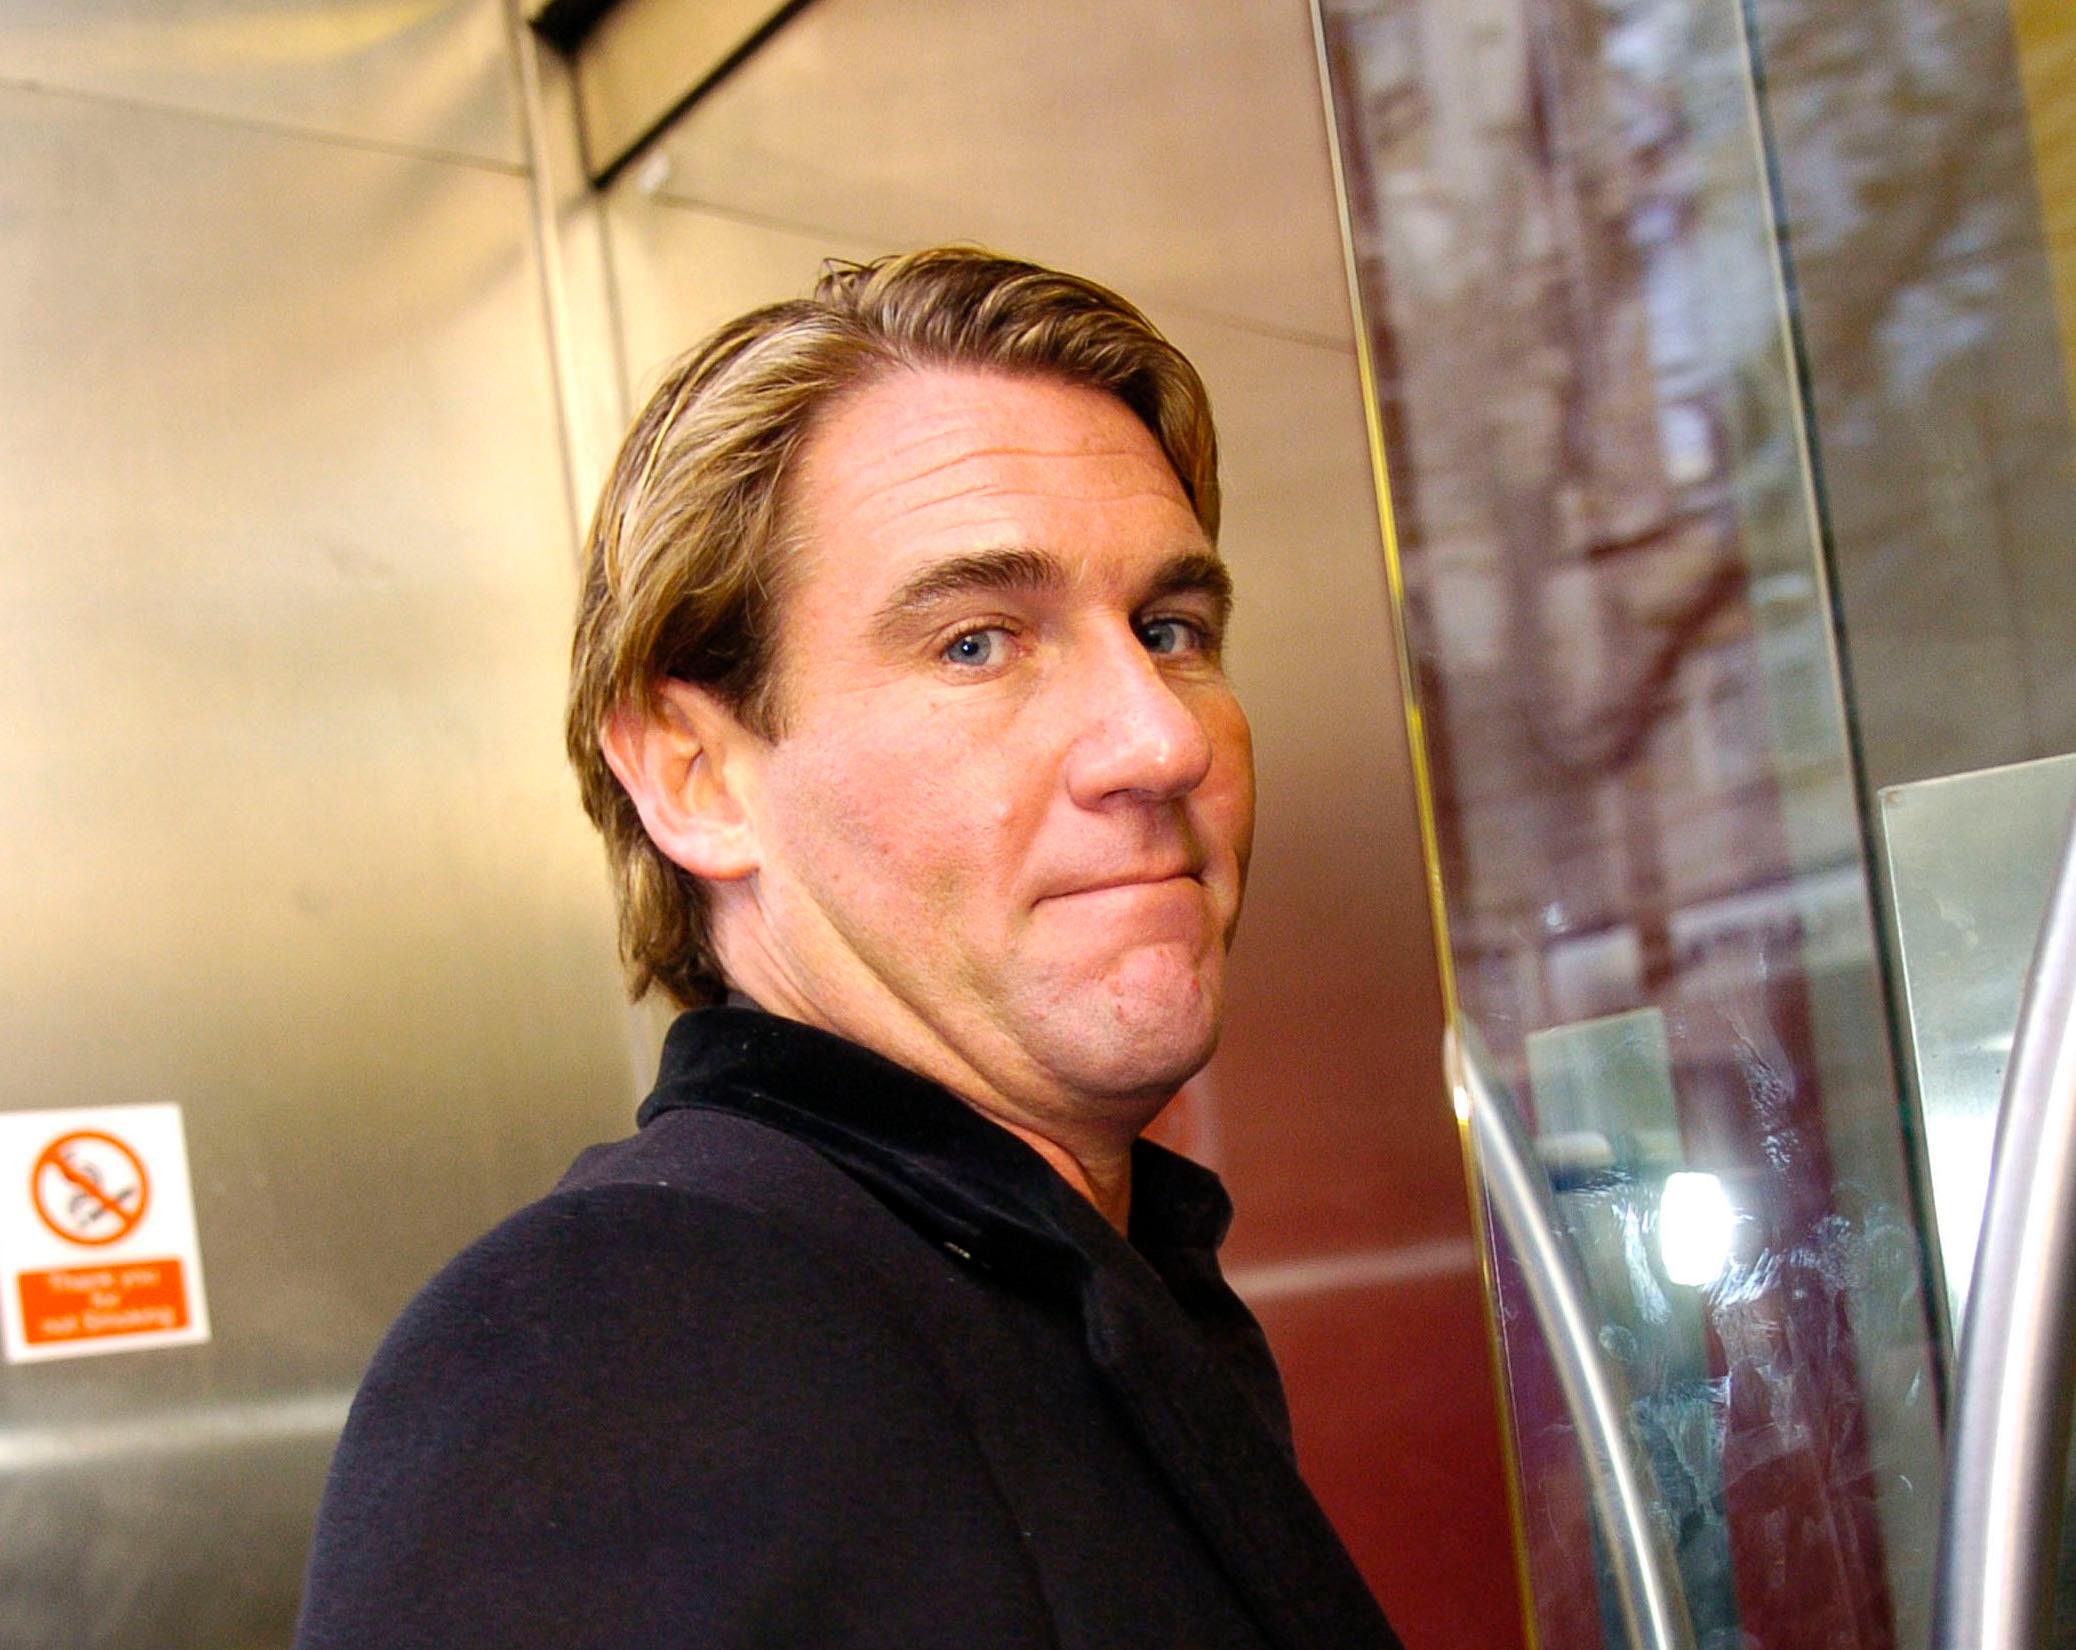 Simon Jordan's Net Worth: From Mobile Phones to Owning a Sports Team